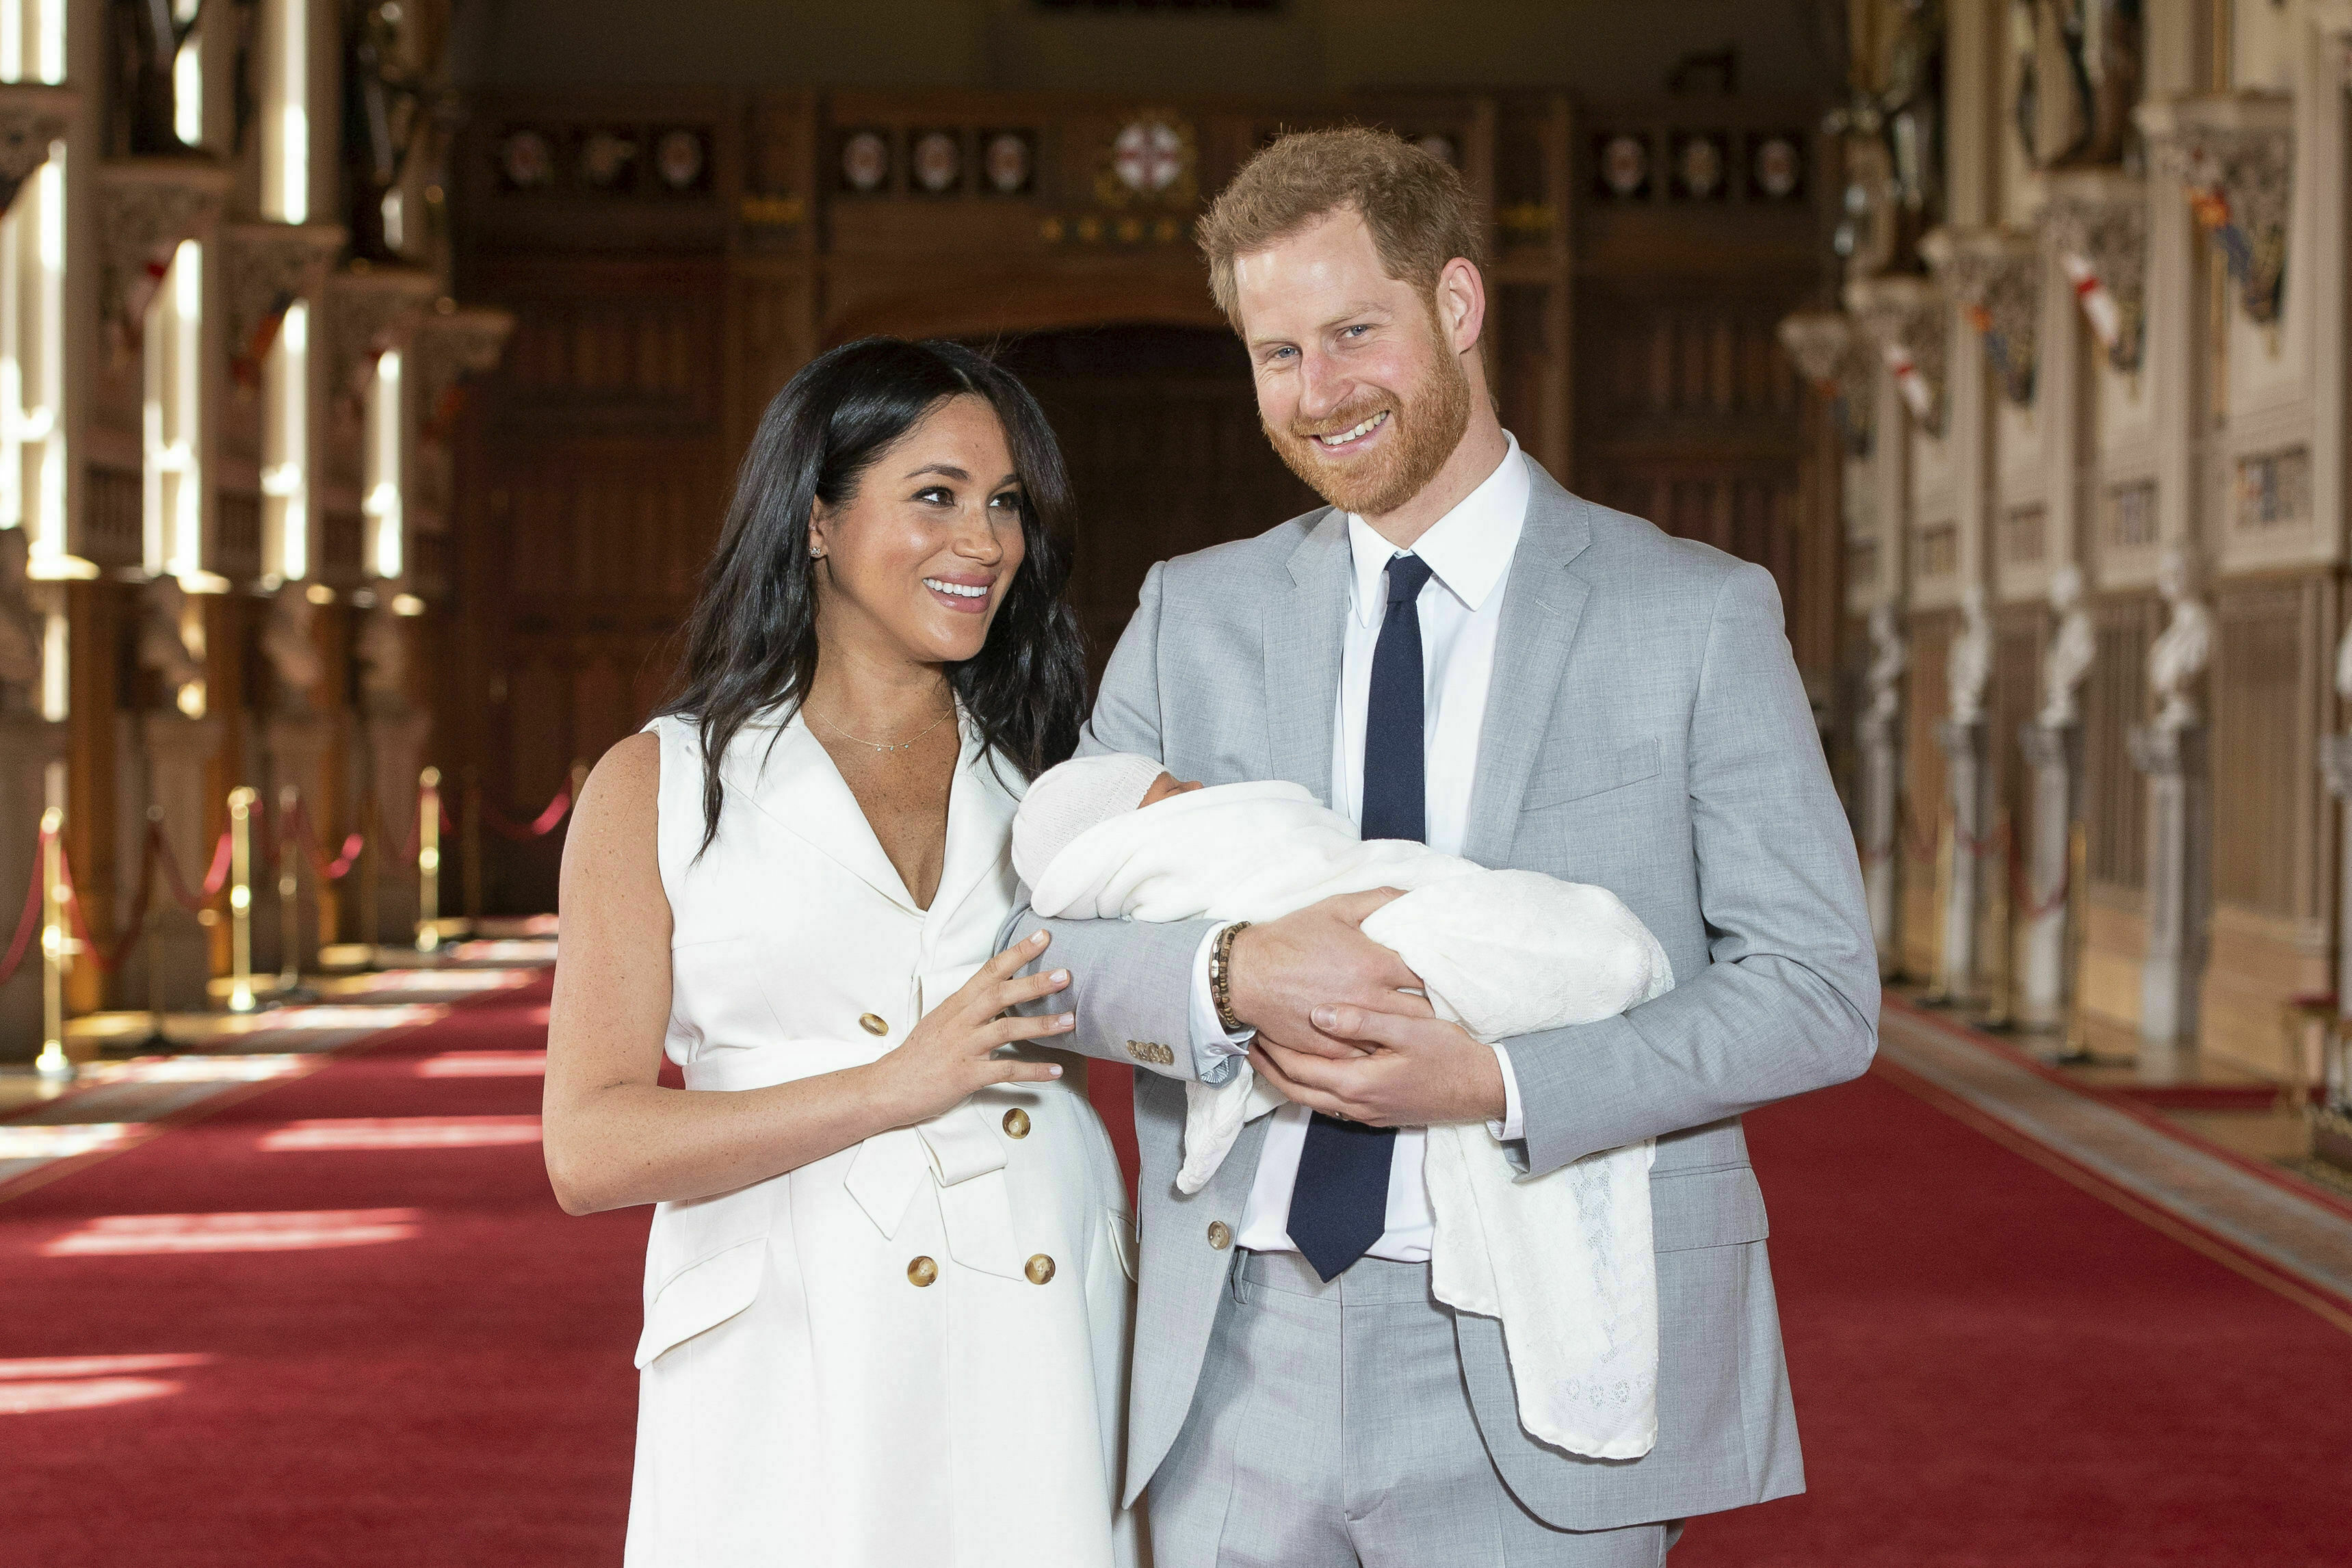 Meghan Markle and Prince Harry reveal their son's name